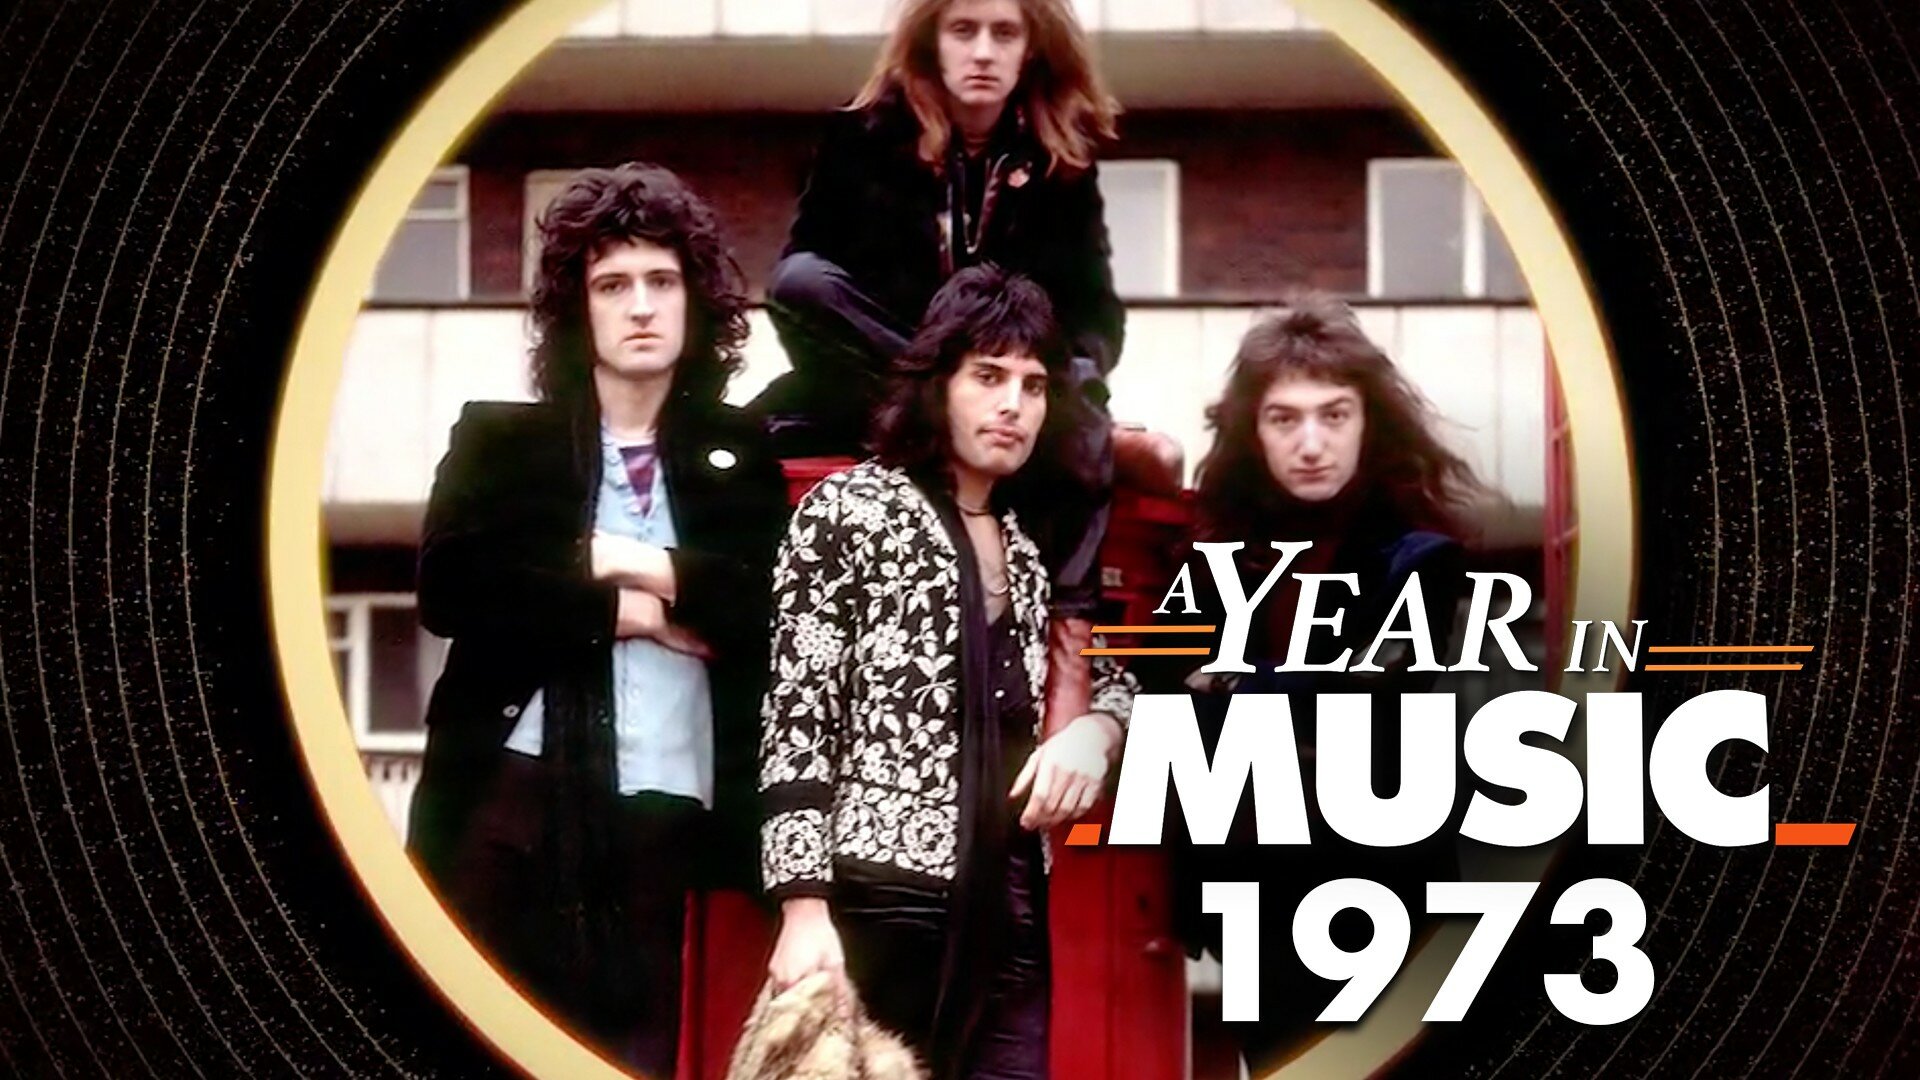 A Year in Music S1E7 1973